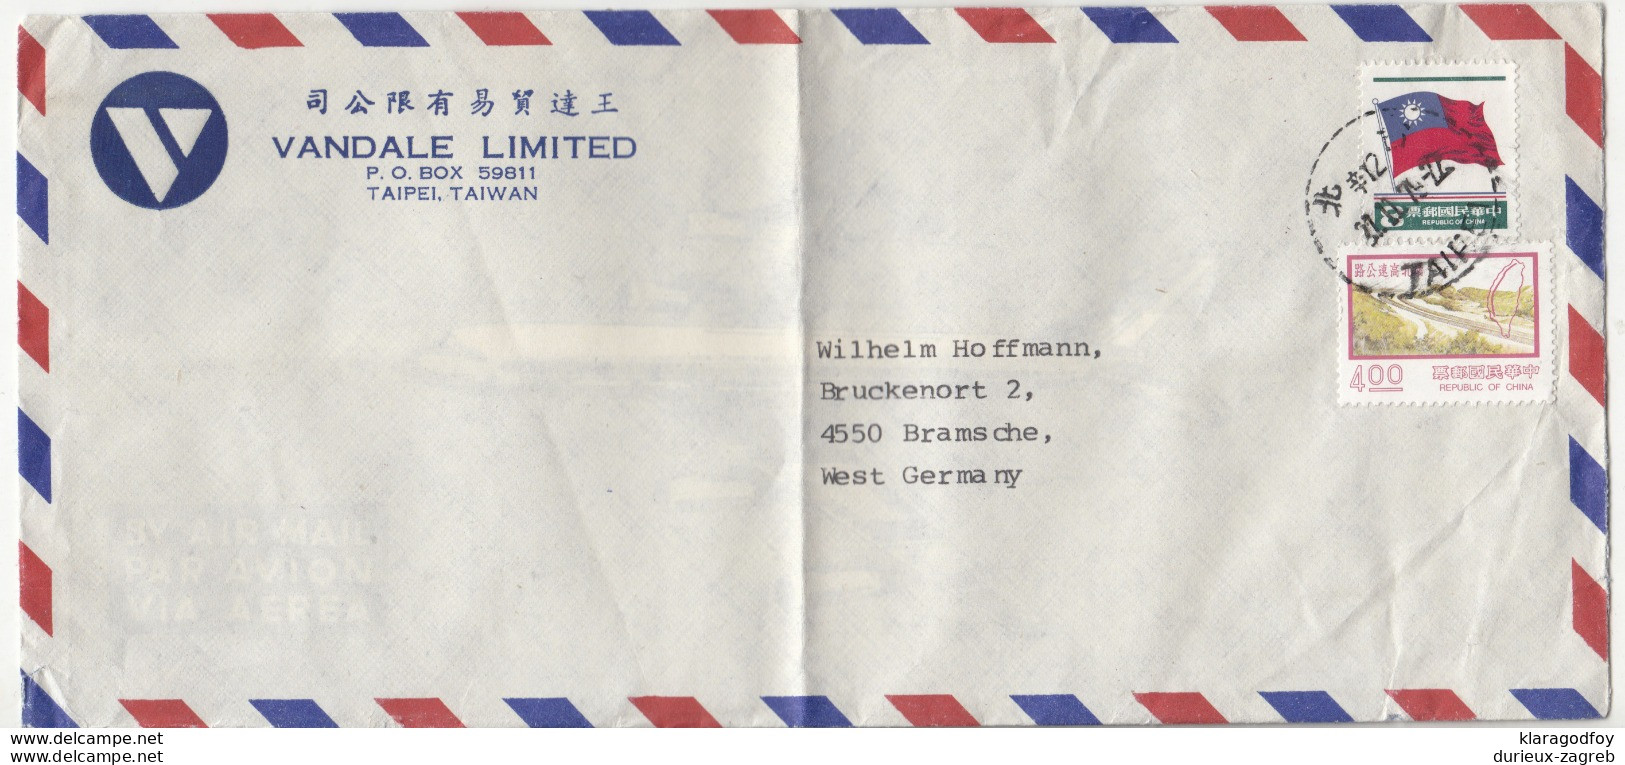 Vandale Limited Taipei Company Air Mail Letter Cover Travelled 197? To Germany B190922 - Cartas & Documentos